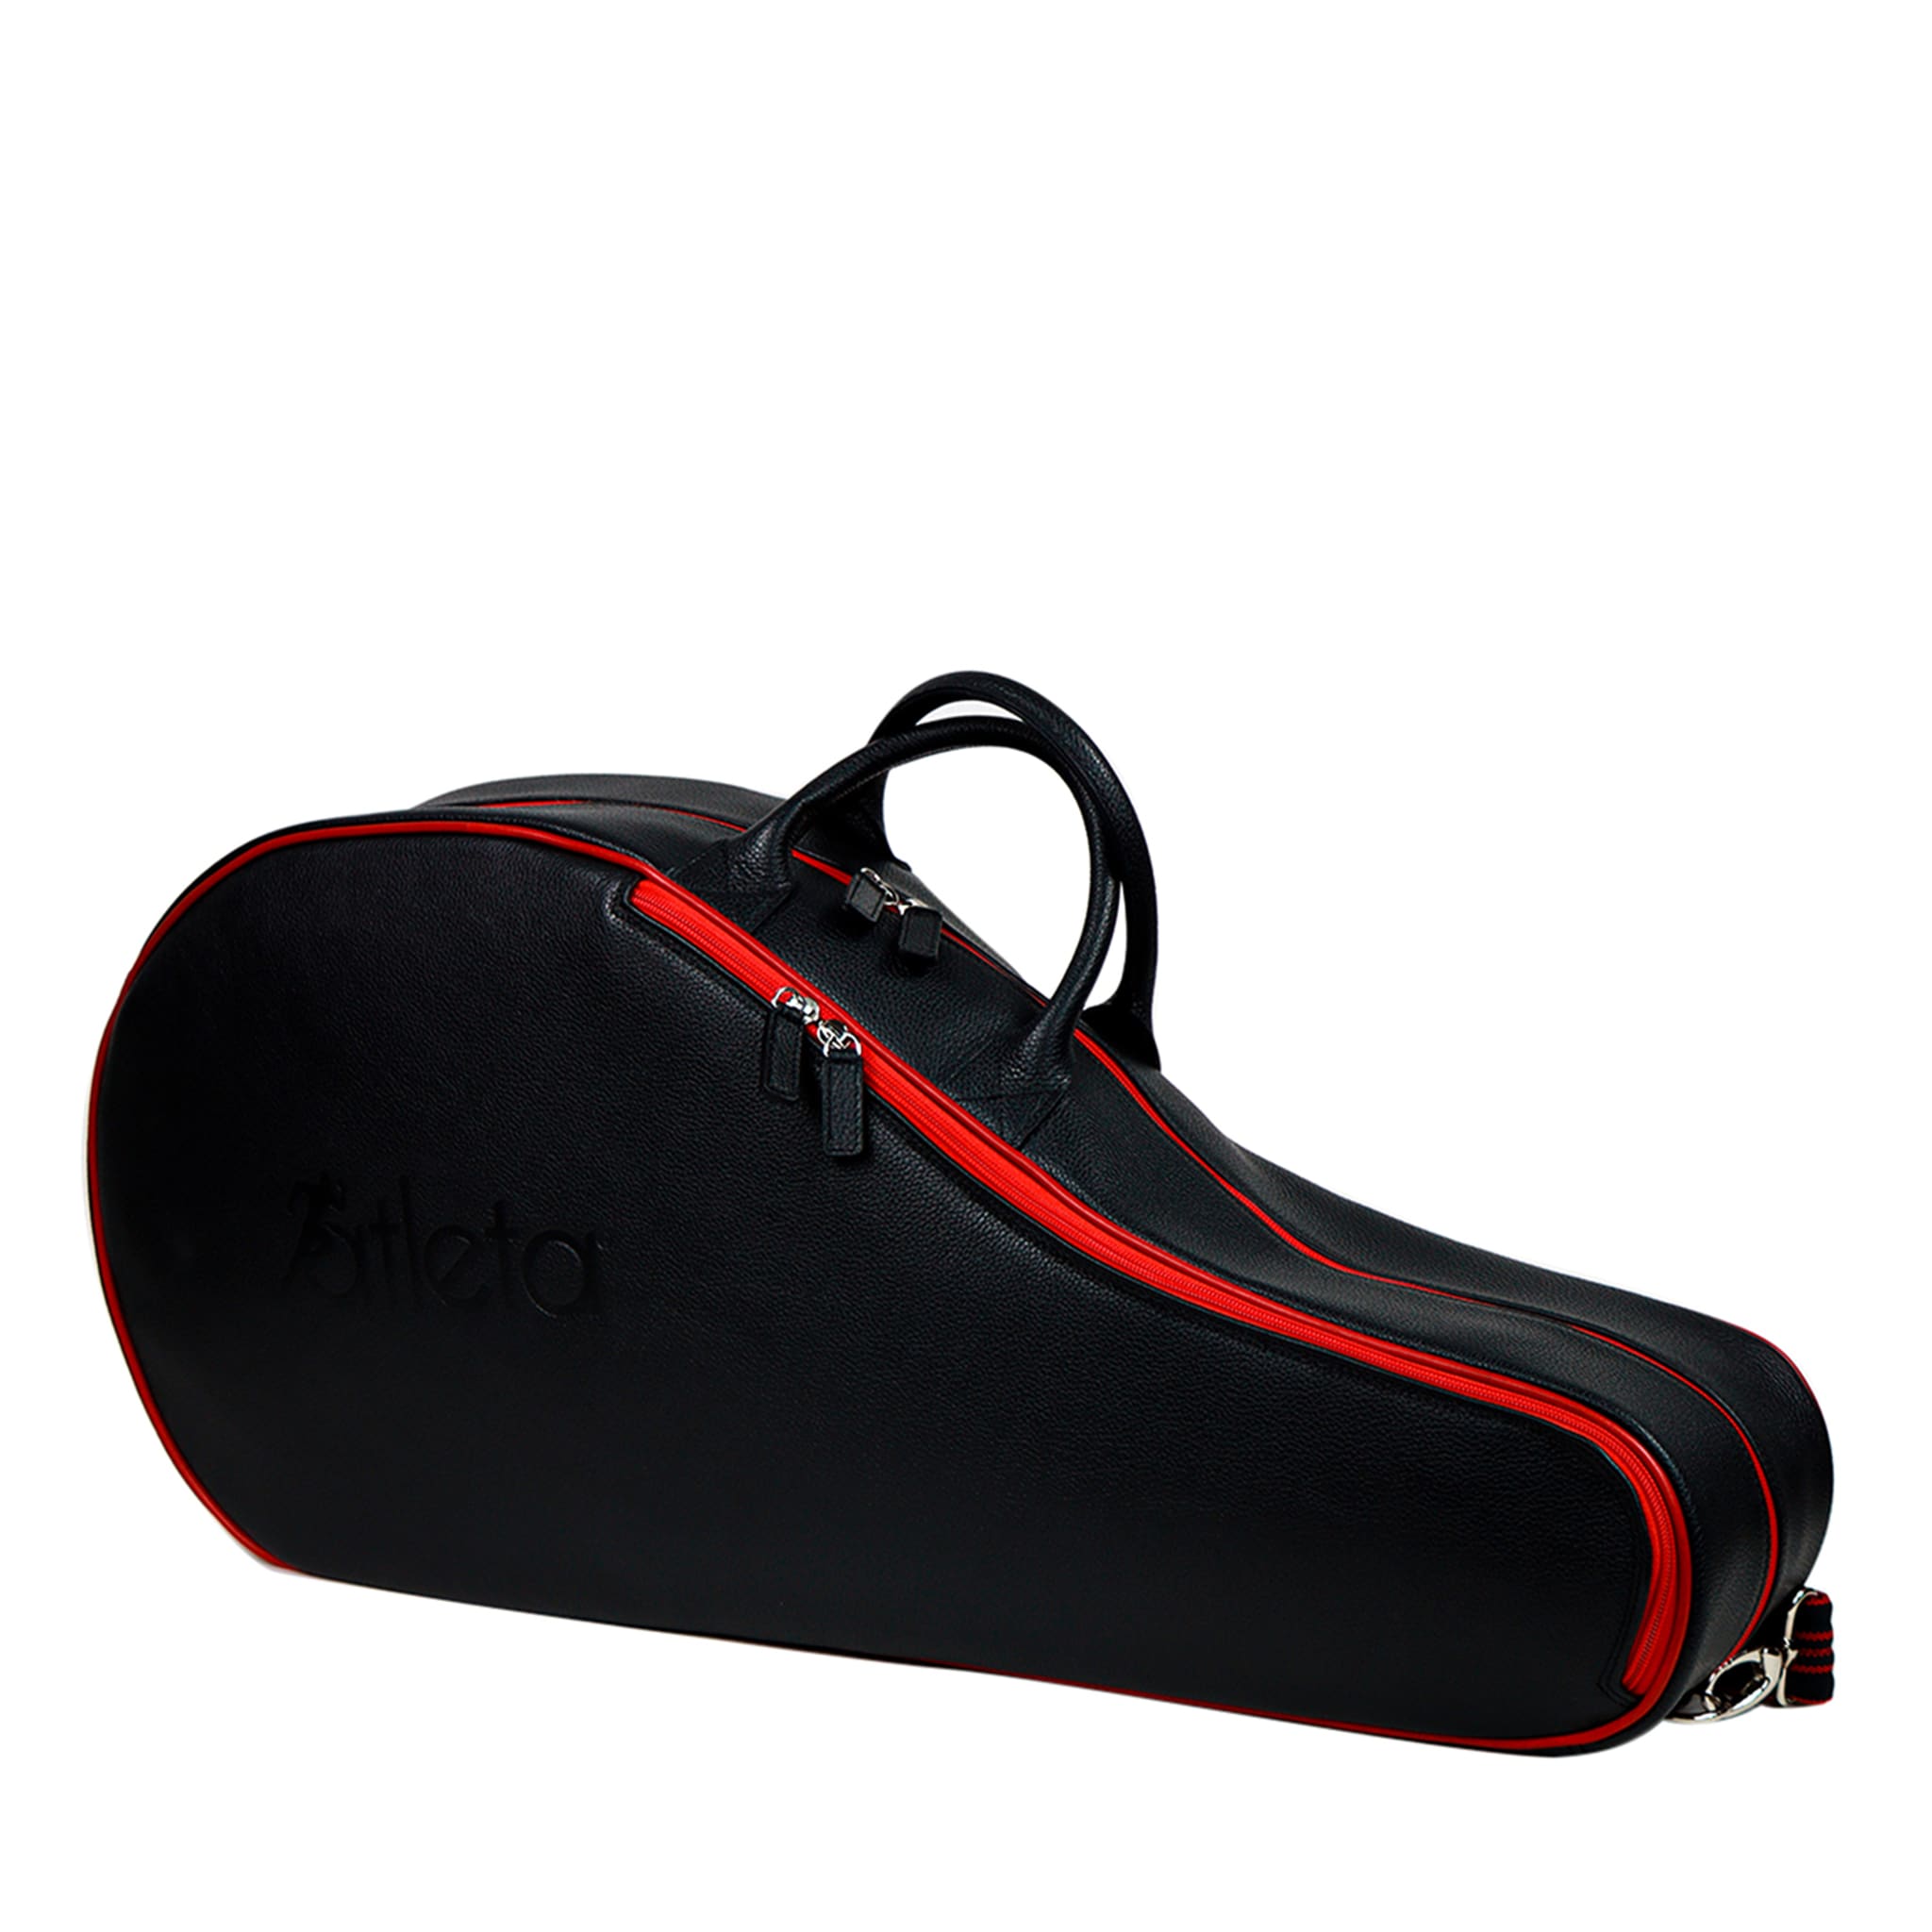 Red and Black Tennis Bag - Main view